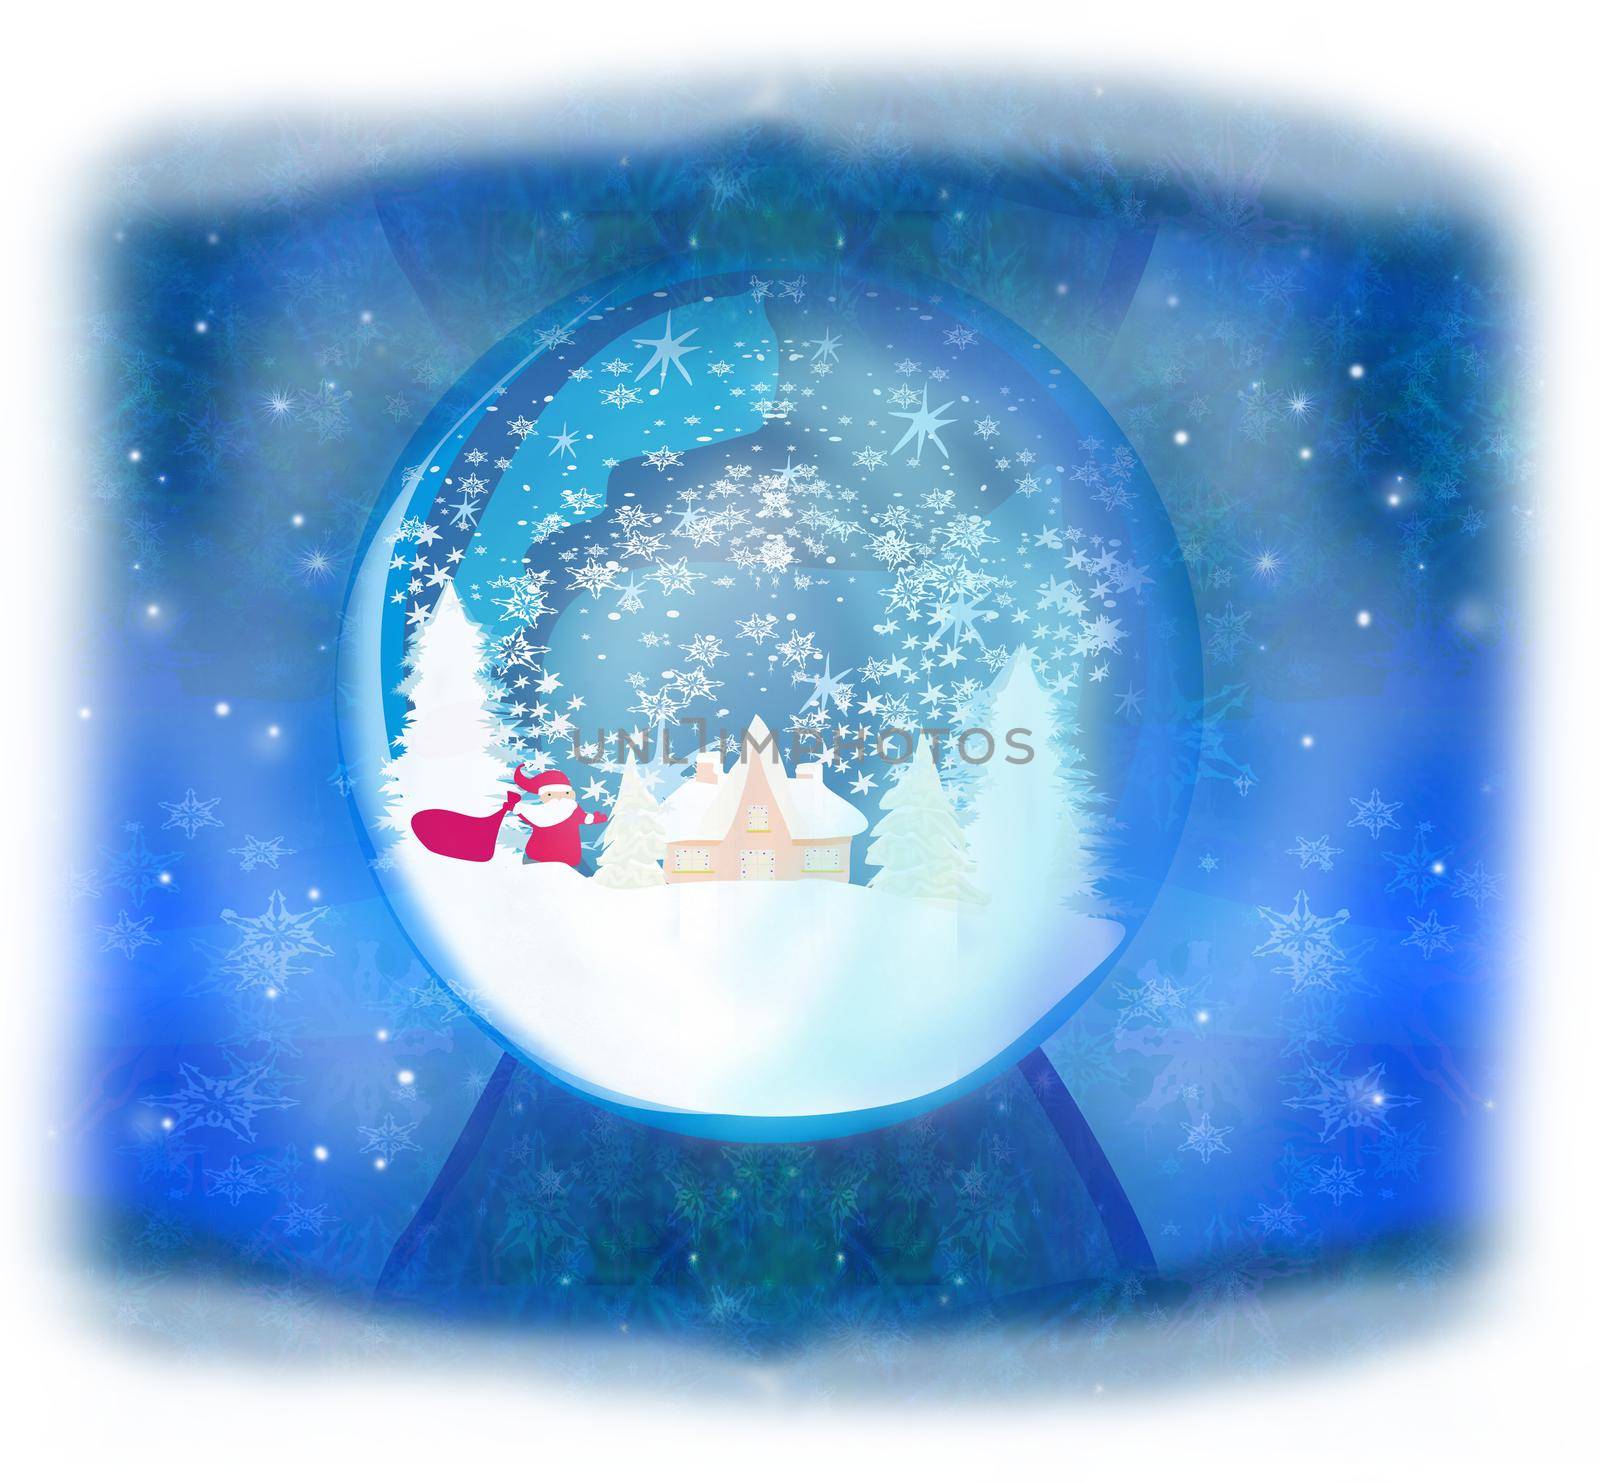 Santa Claus in a glass ball by JackyBrown